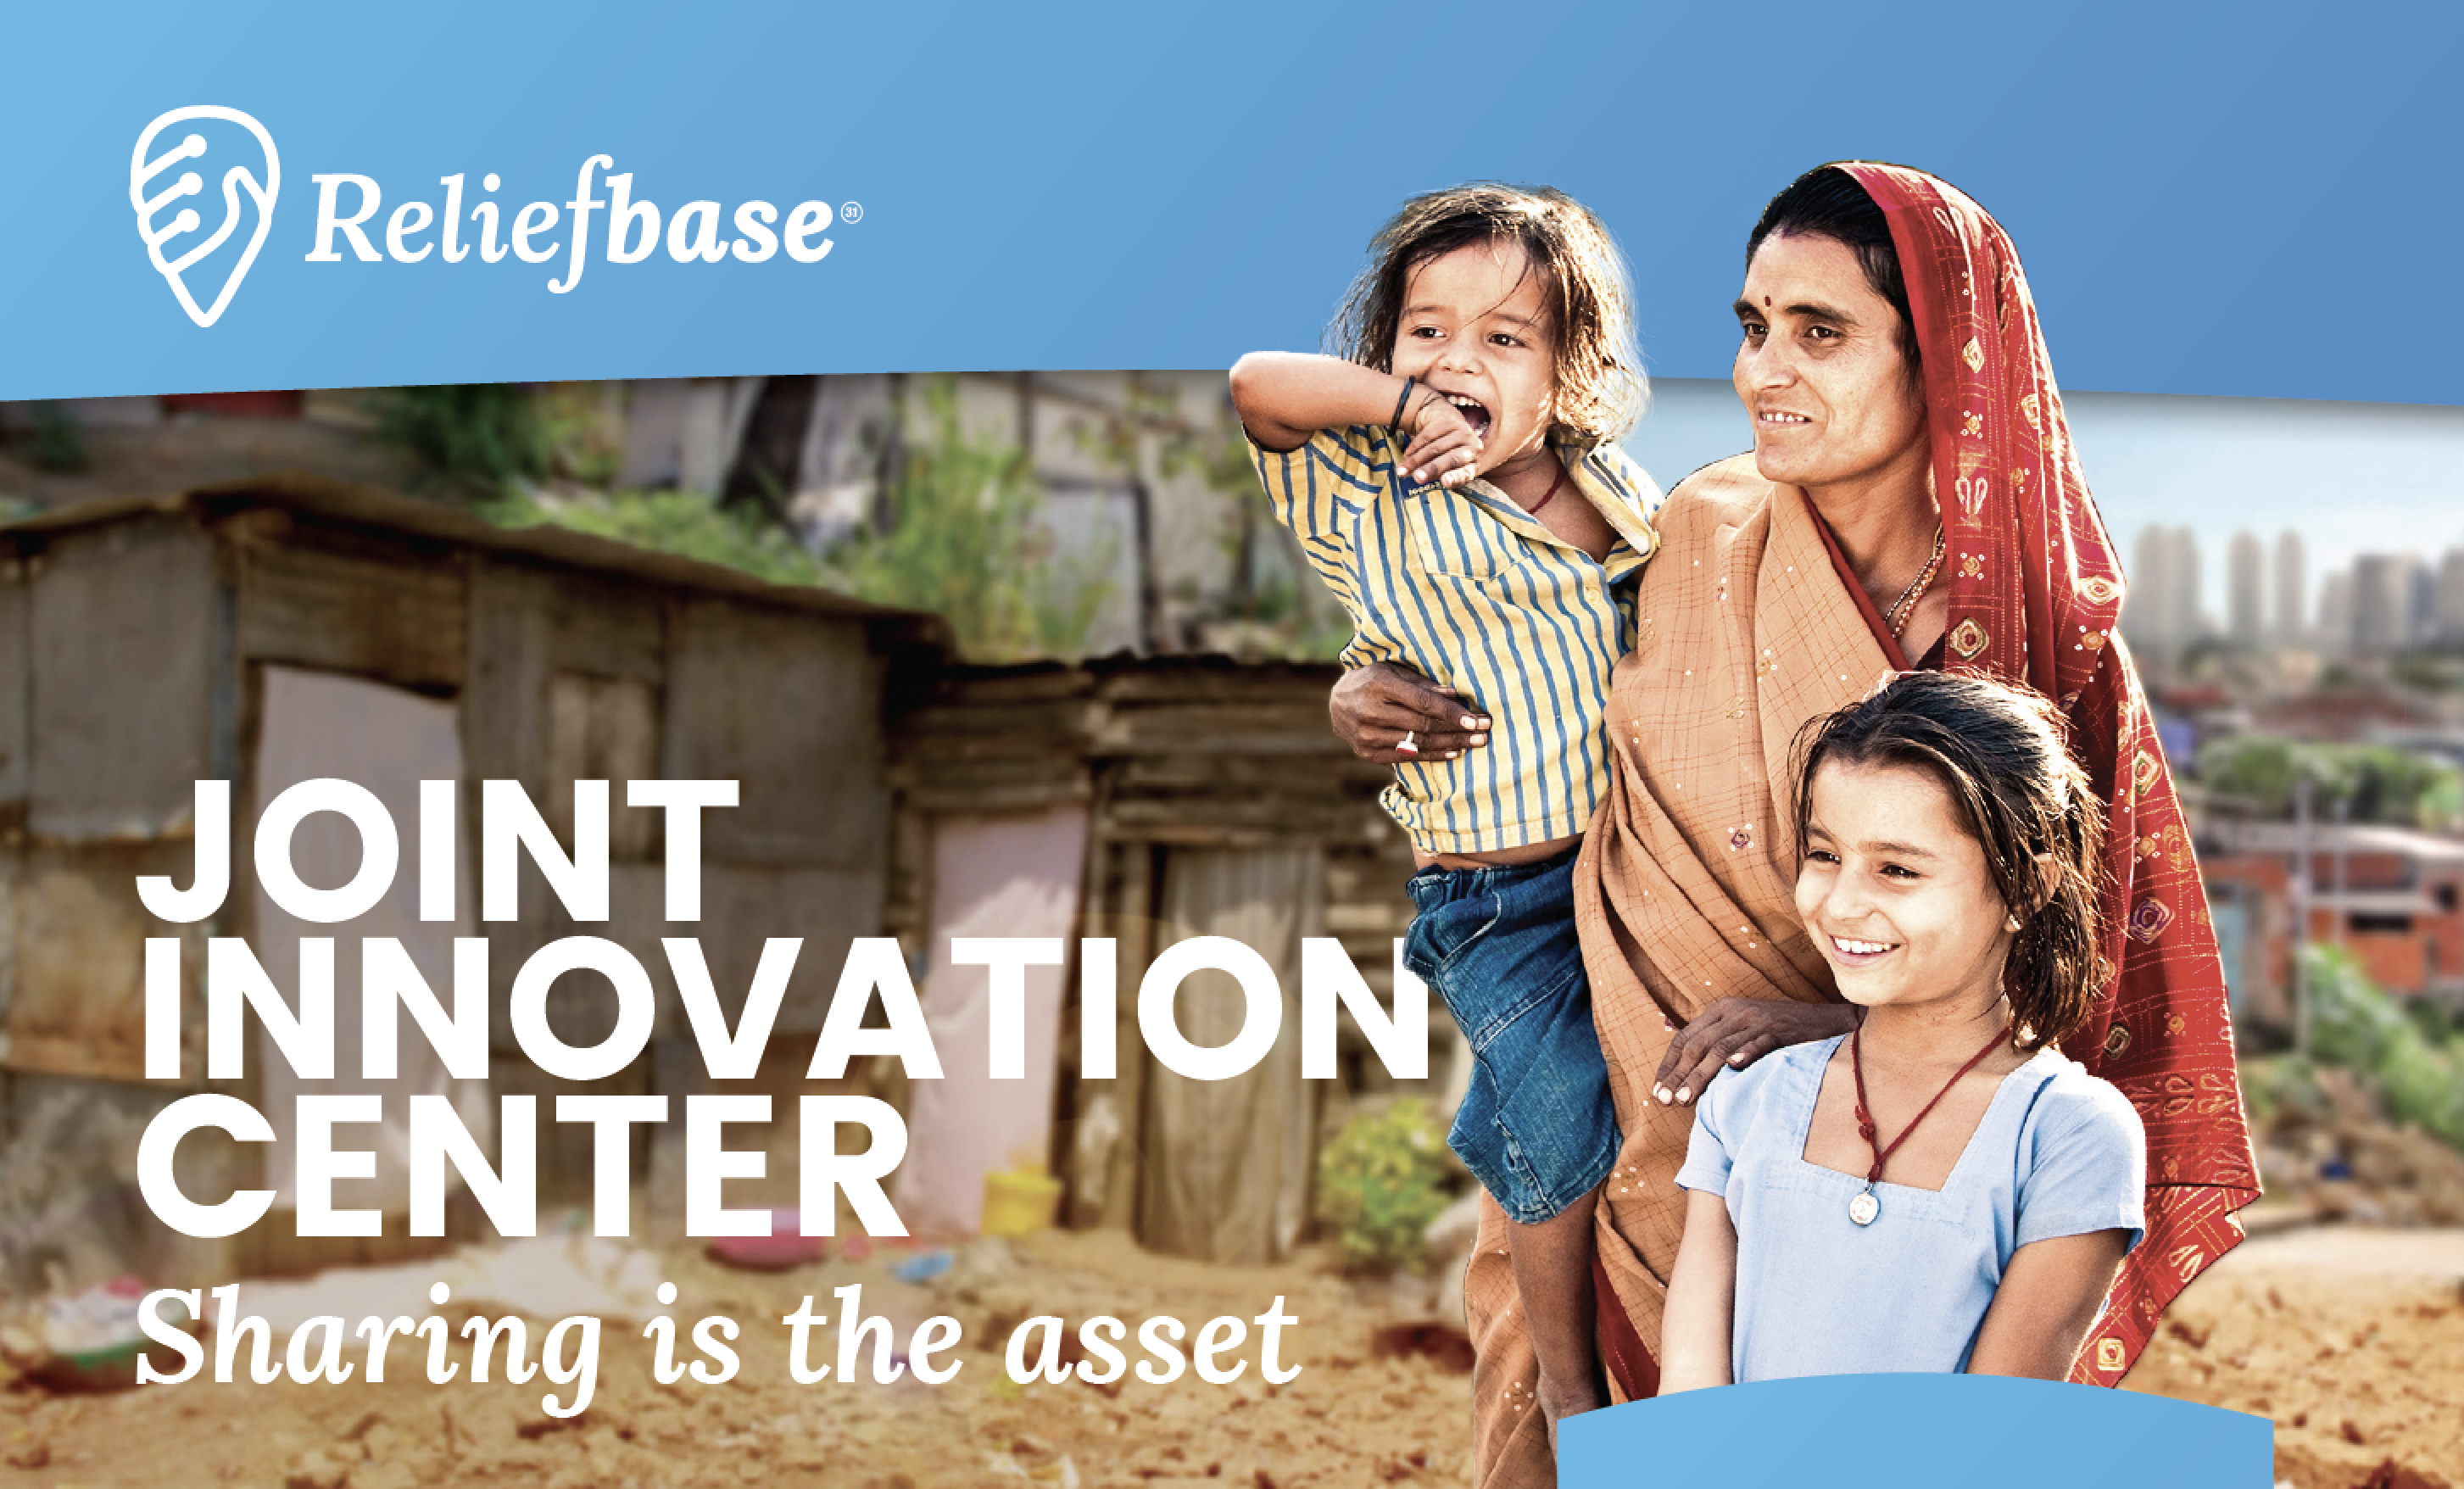 Why a Reliefbase ?&nbsp; In the Netherlands we invest in the challenge of setting up a new humanitarian ecosystem for innovation as a partner wi...